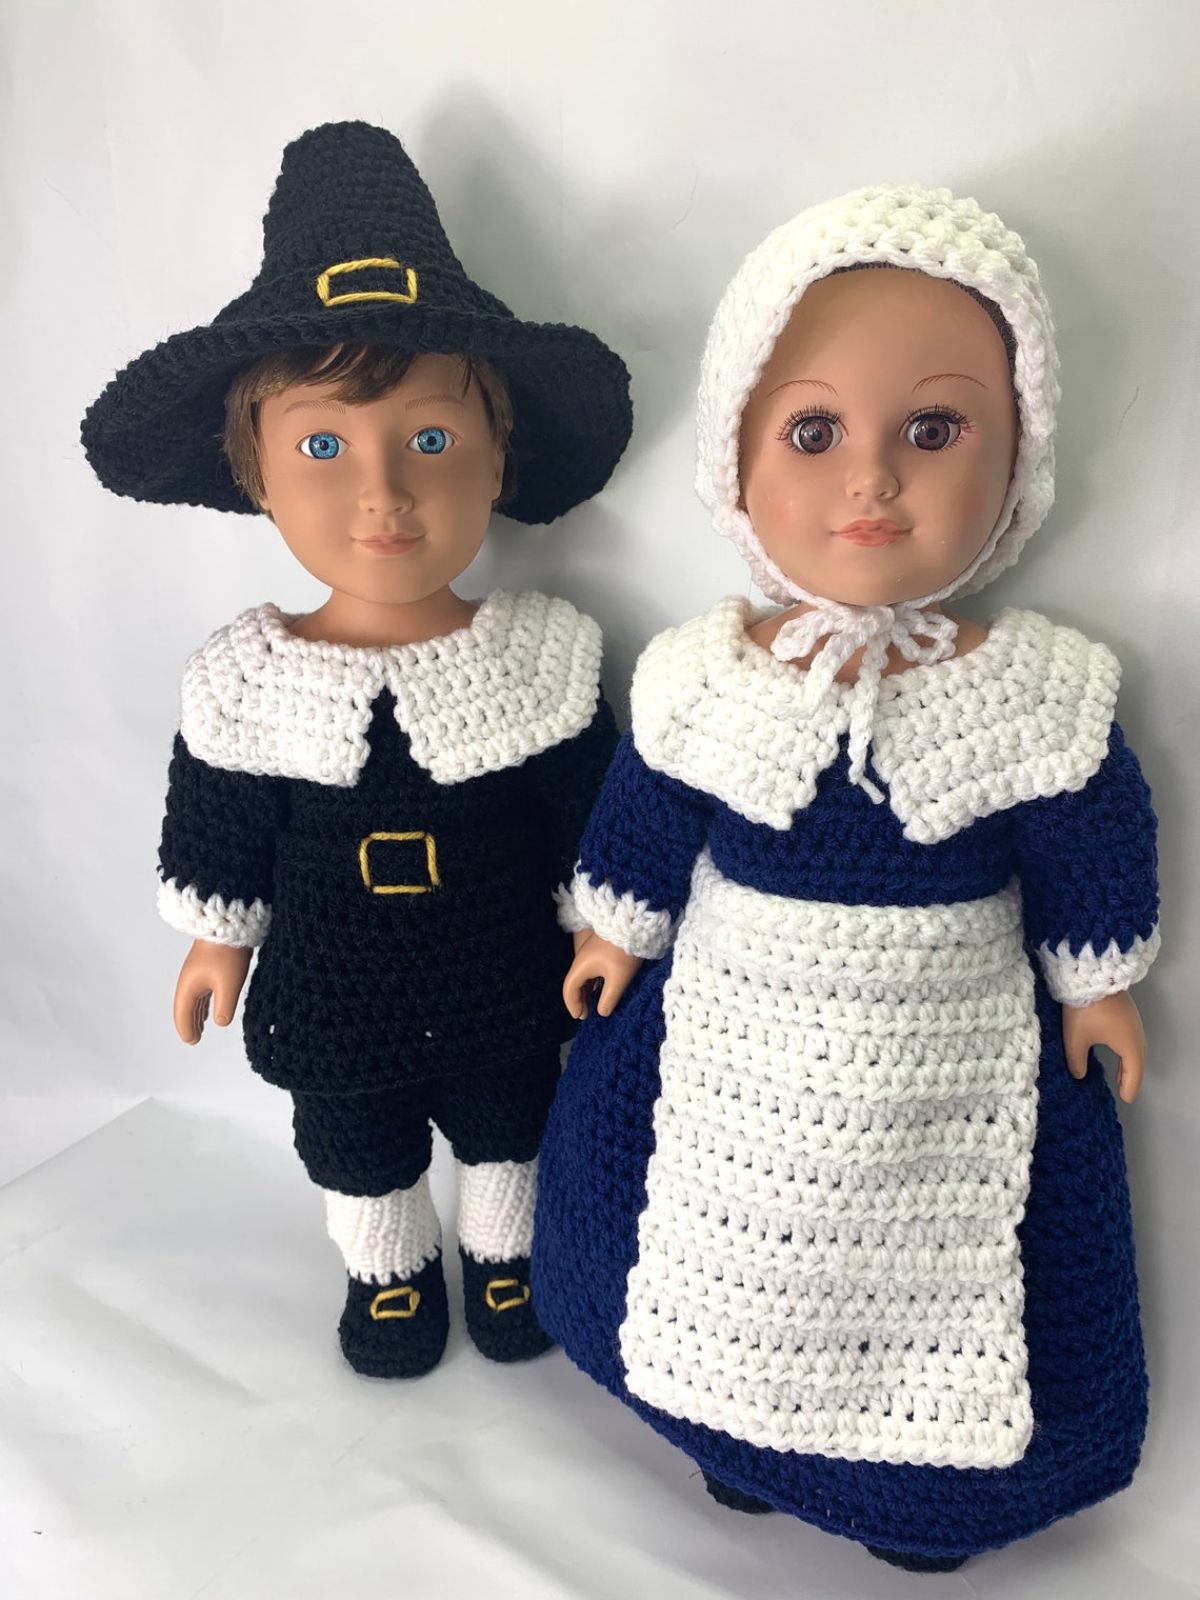 A male and female doll wearing traditional crochet pilgrim outfits standing next to each other on a white background.